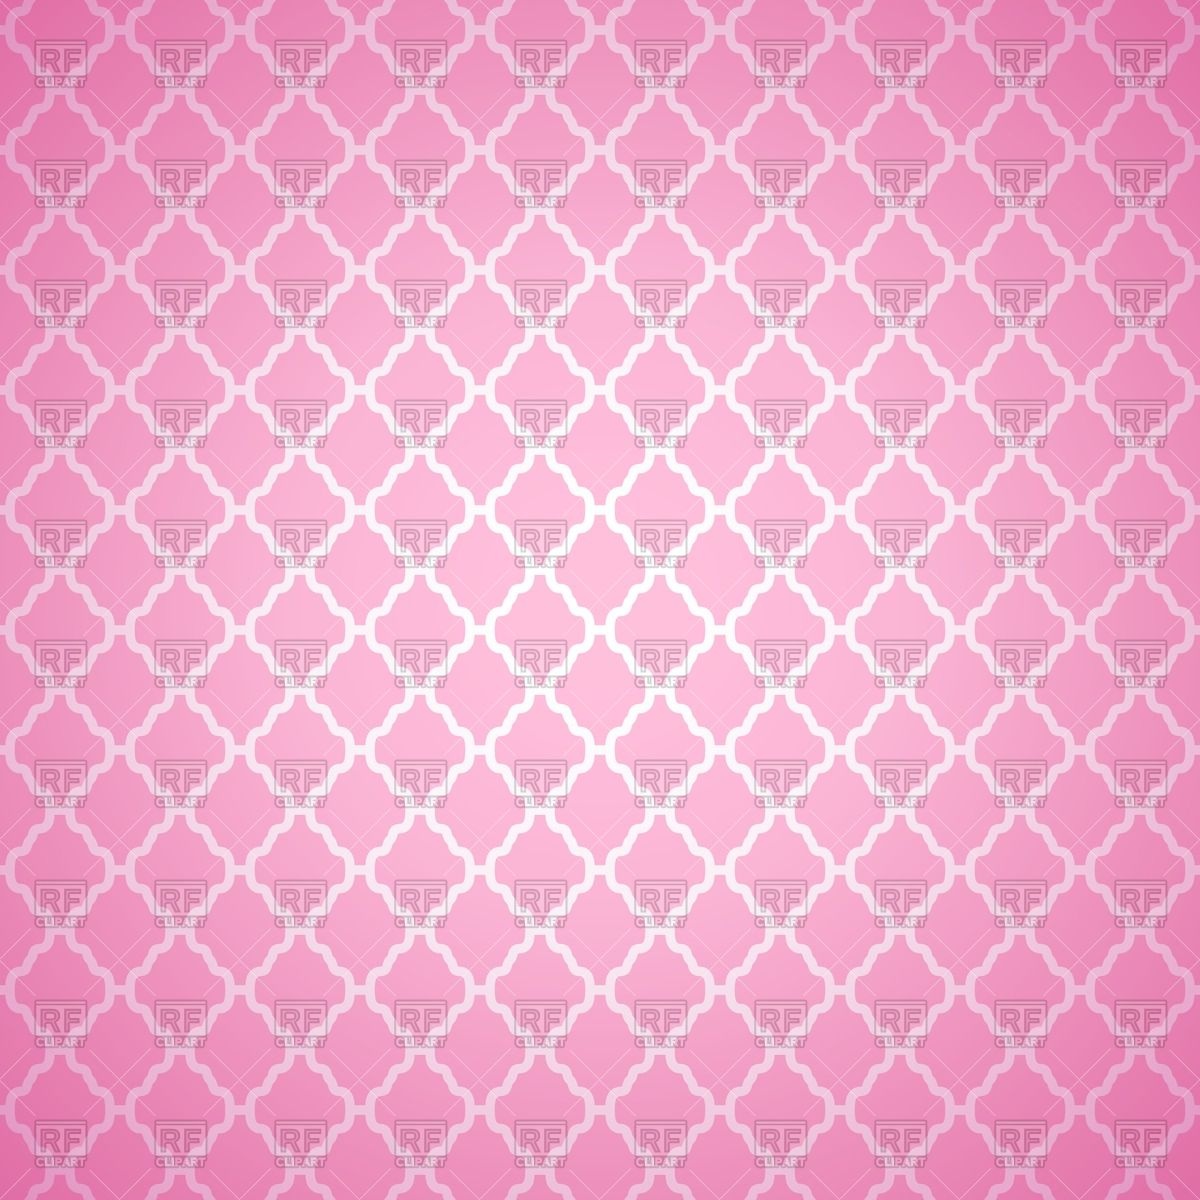 Pink Retro Wallpaper With Mesh Download Royalty Free Vector Clipart